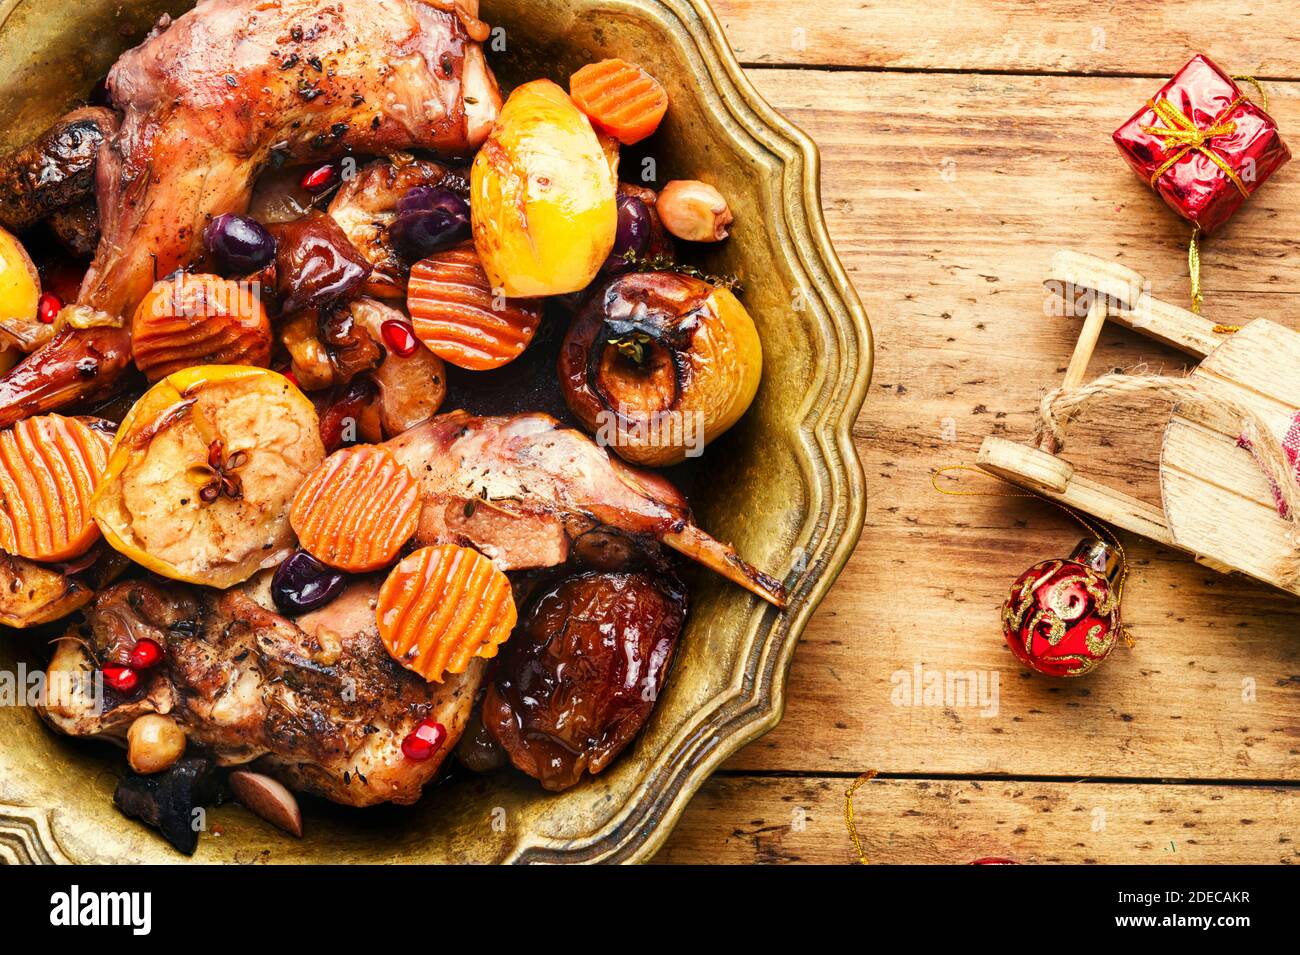 Braised rabbit meat with fruits.Baked meat for the Christmas table. Christmas dish. Stock Photo